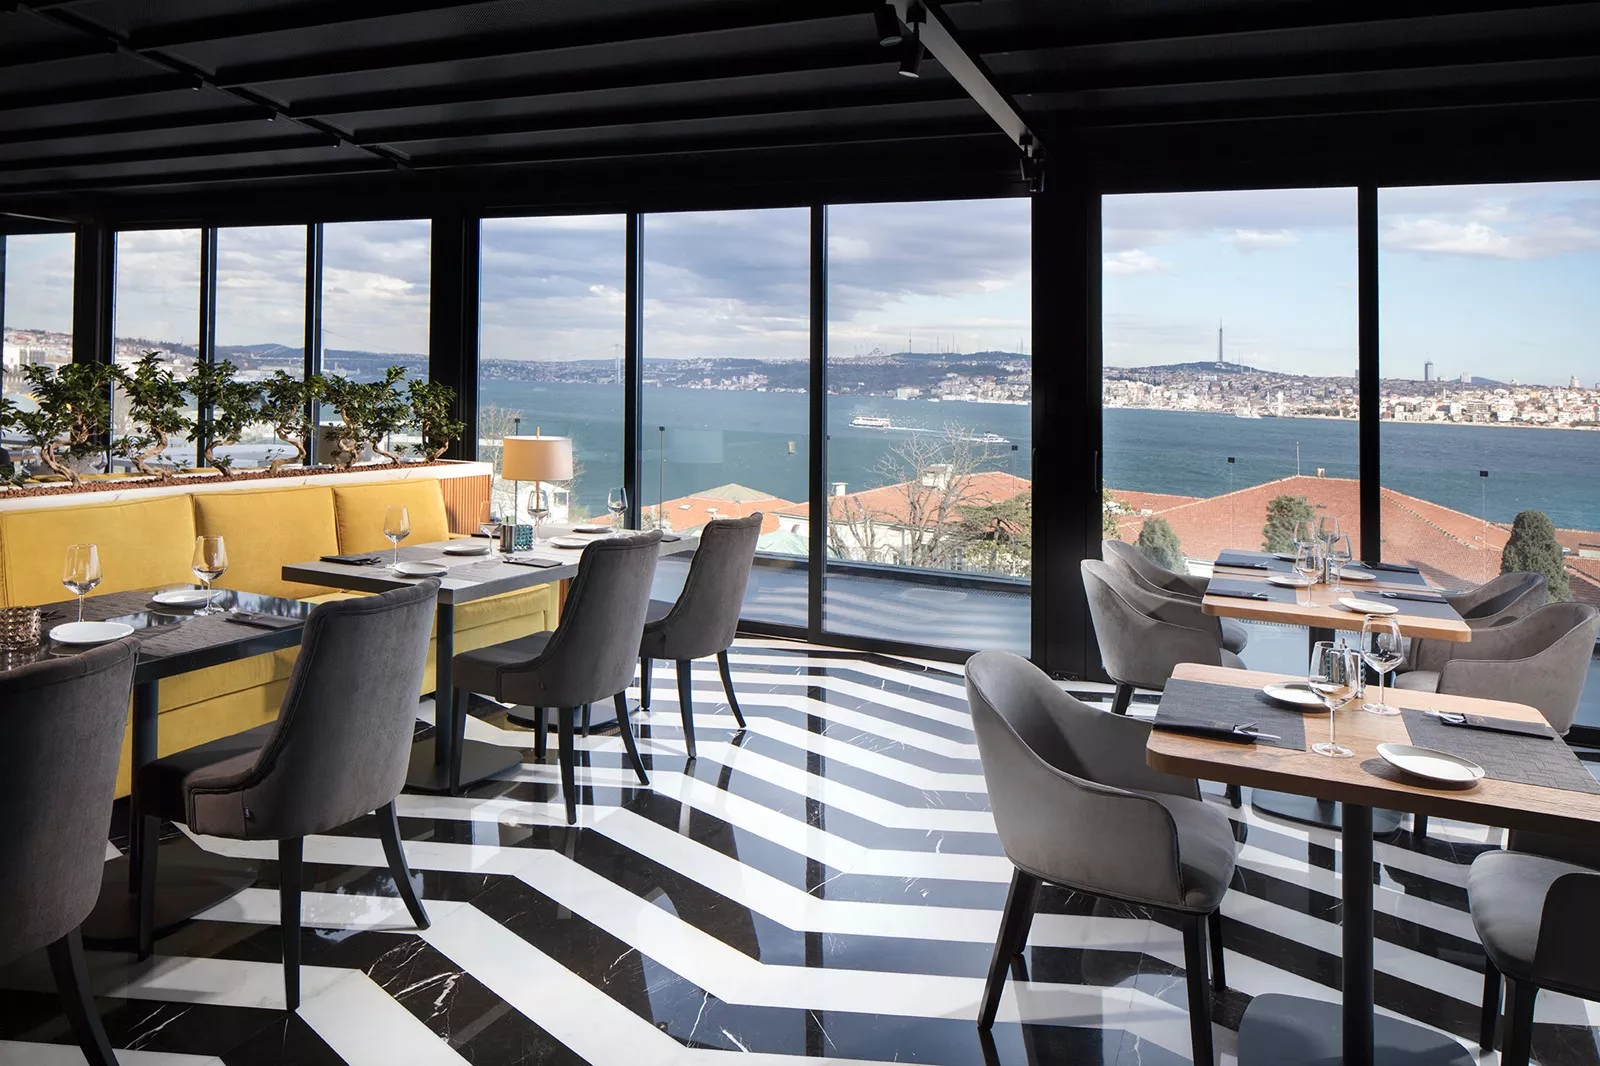 Azure The Bosphorus in Turkey, Central Asia | Hookah Lounges,Restaurants - Rated 3.8